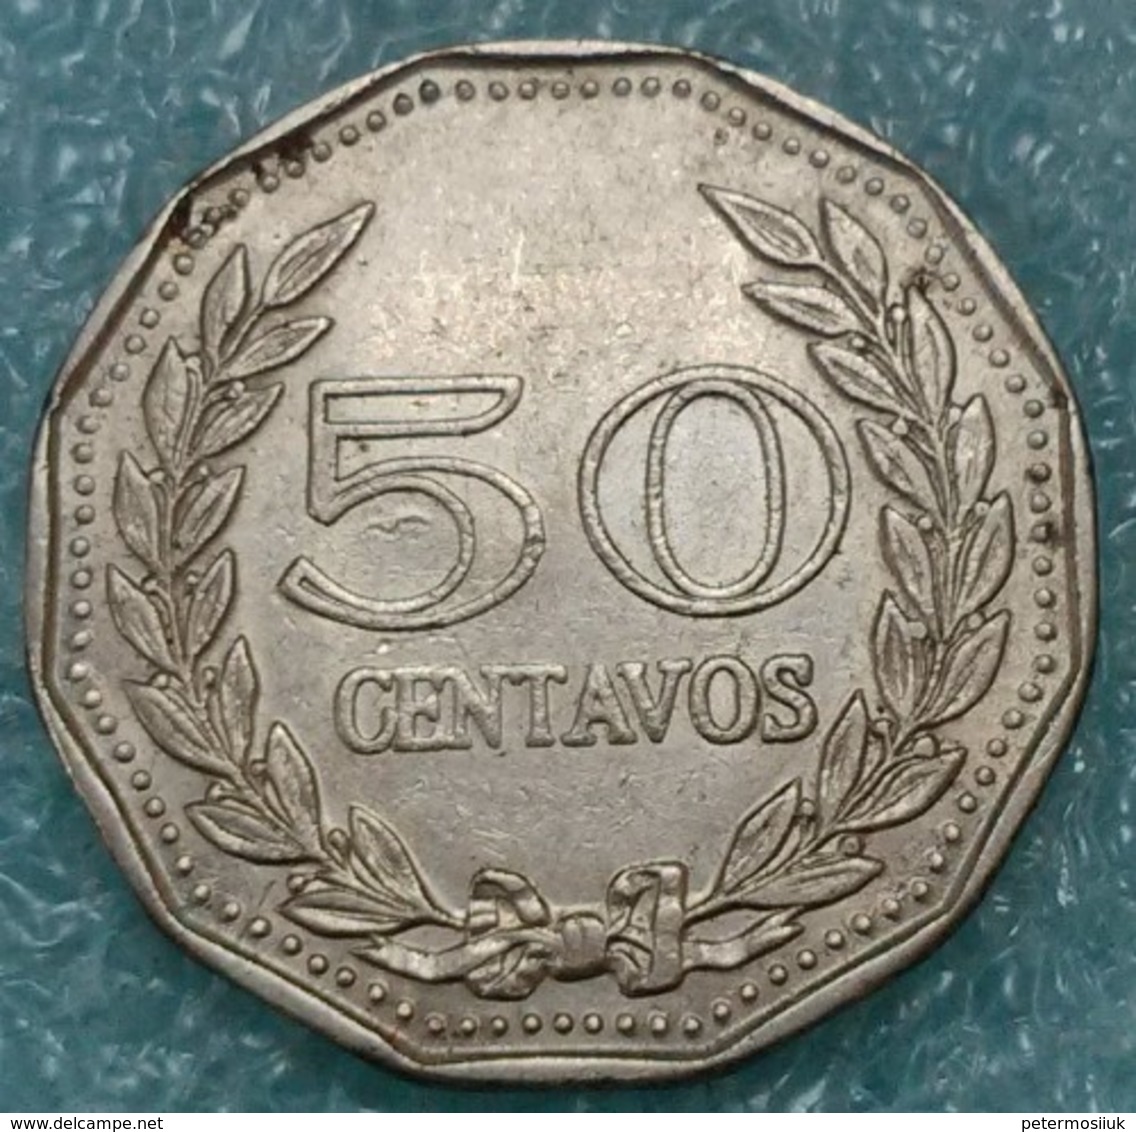 Colombia 50 Centavos, 1971 ↓price↓ - Colombia